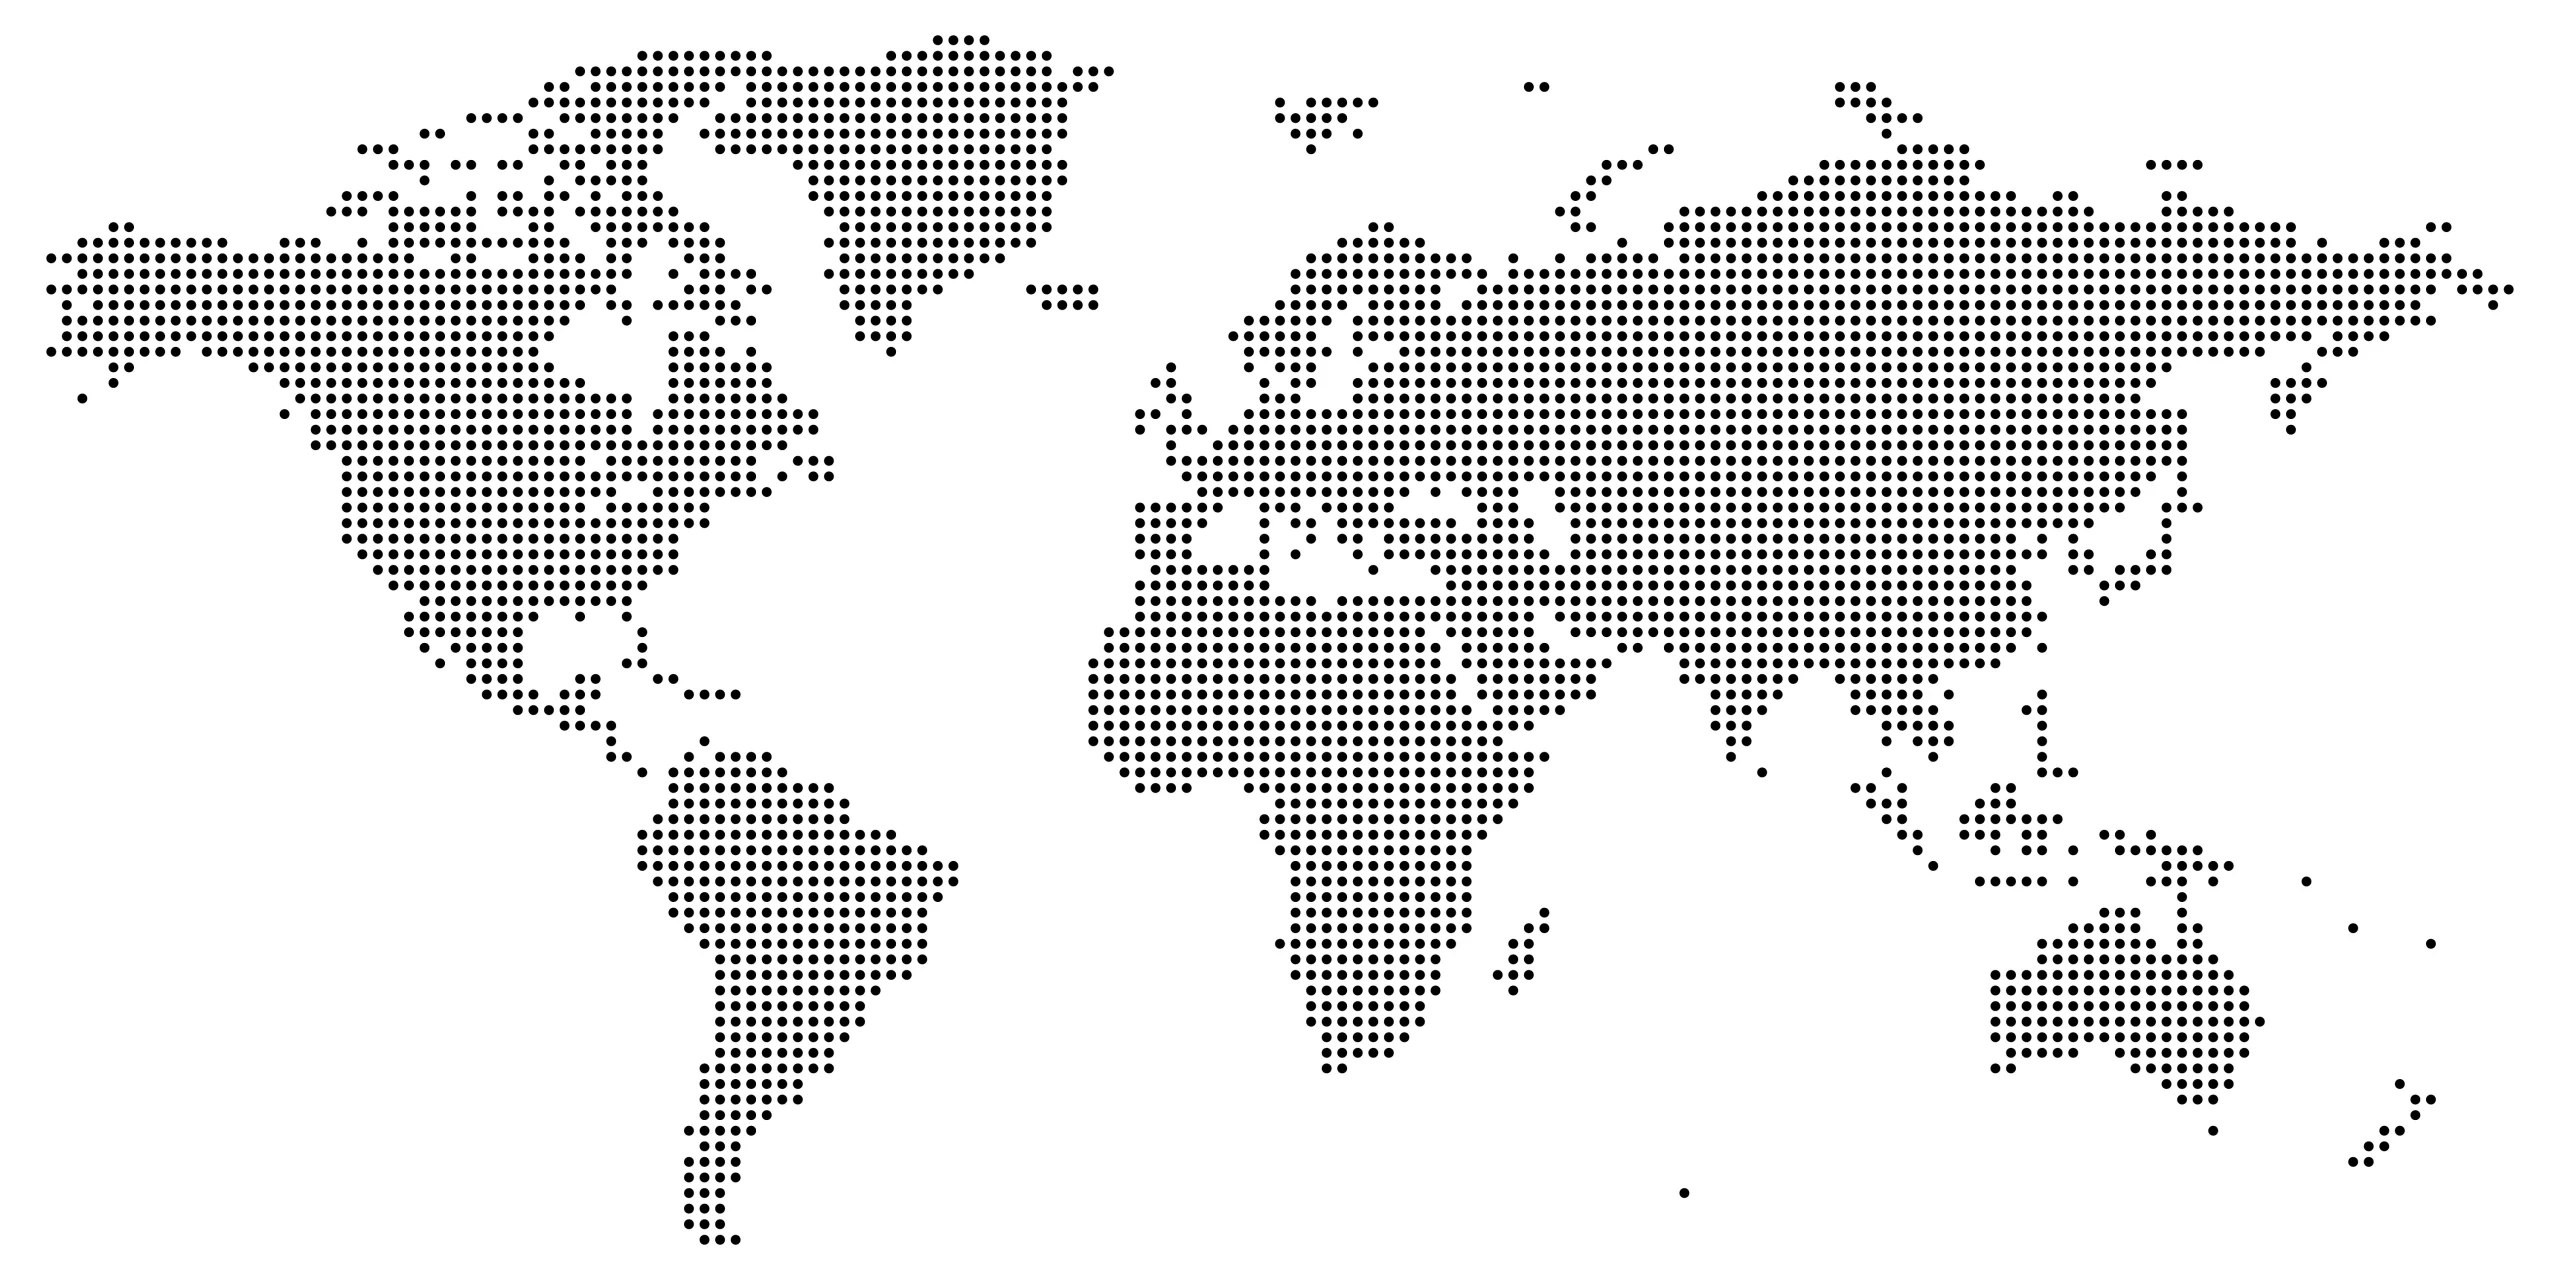 black-on-white-dotted-world-map-vector